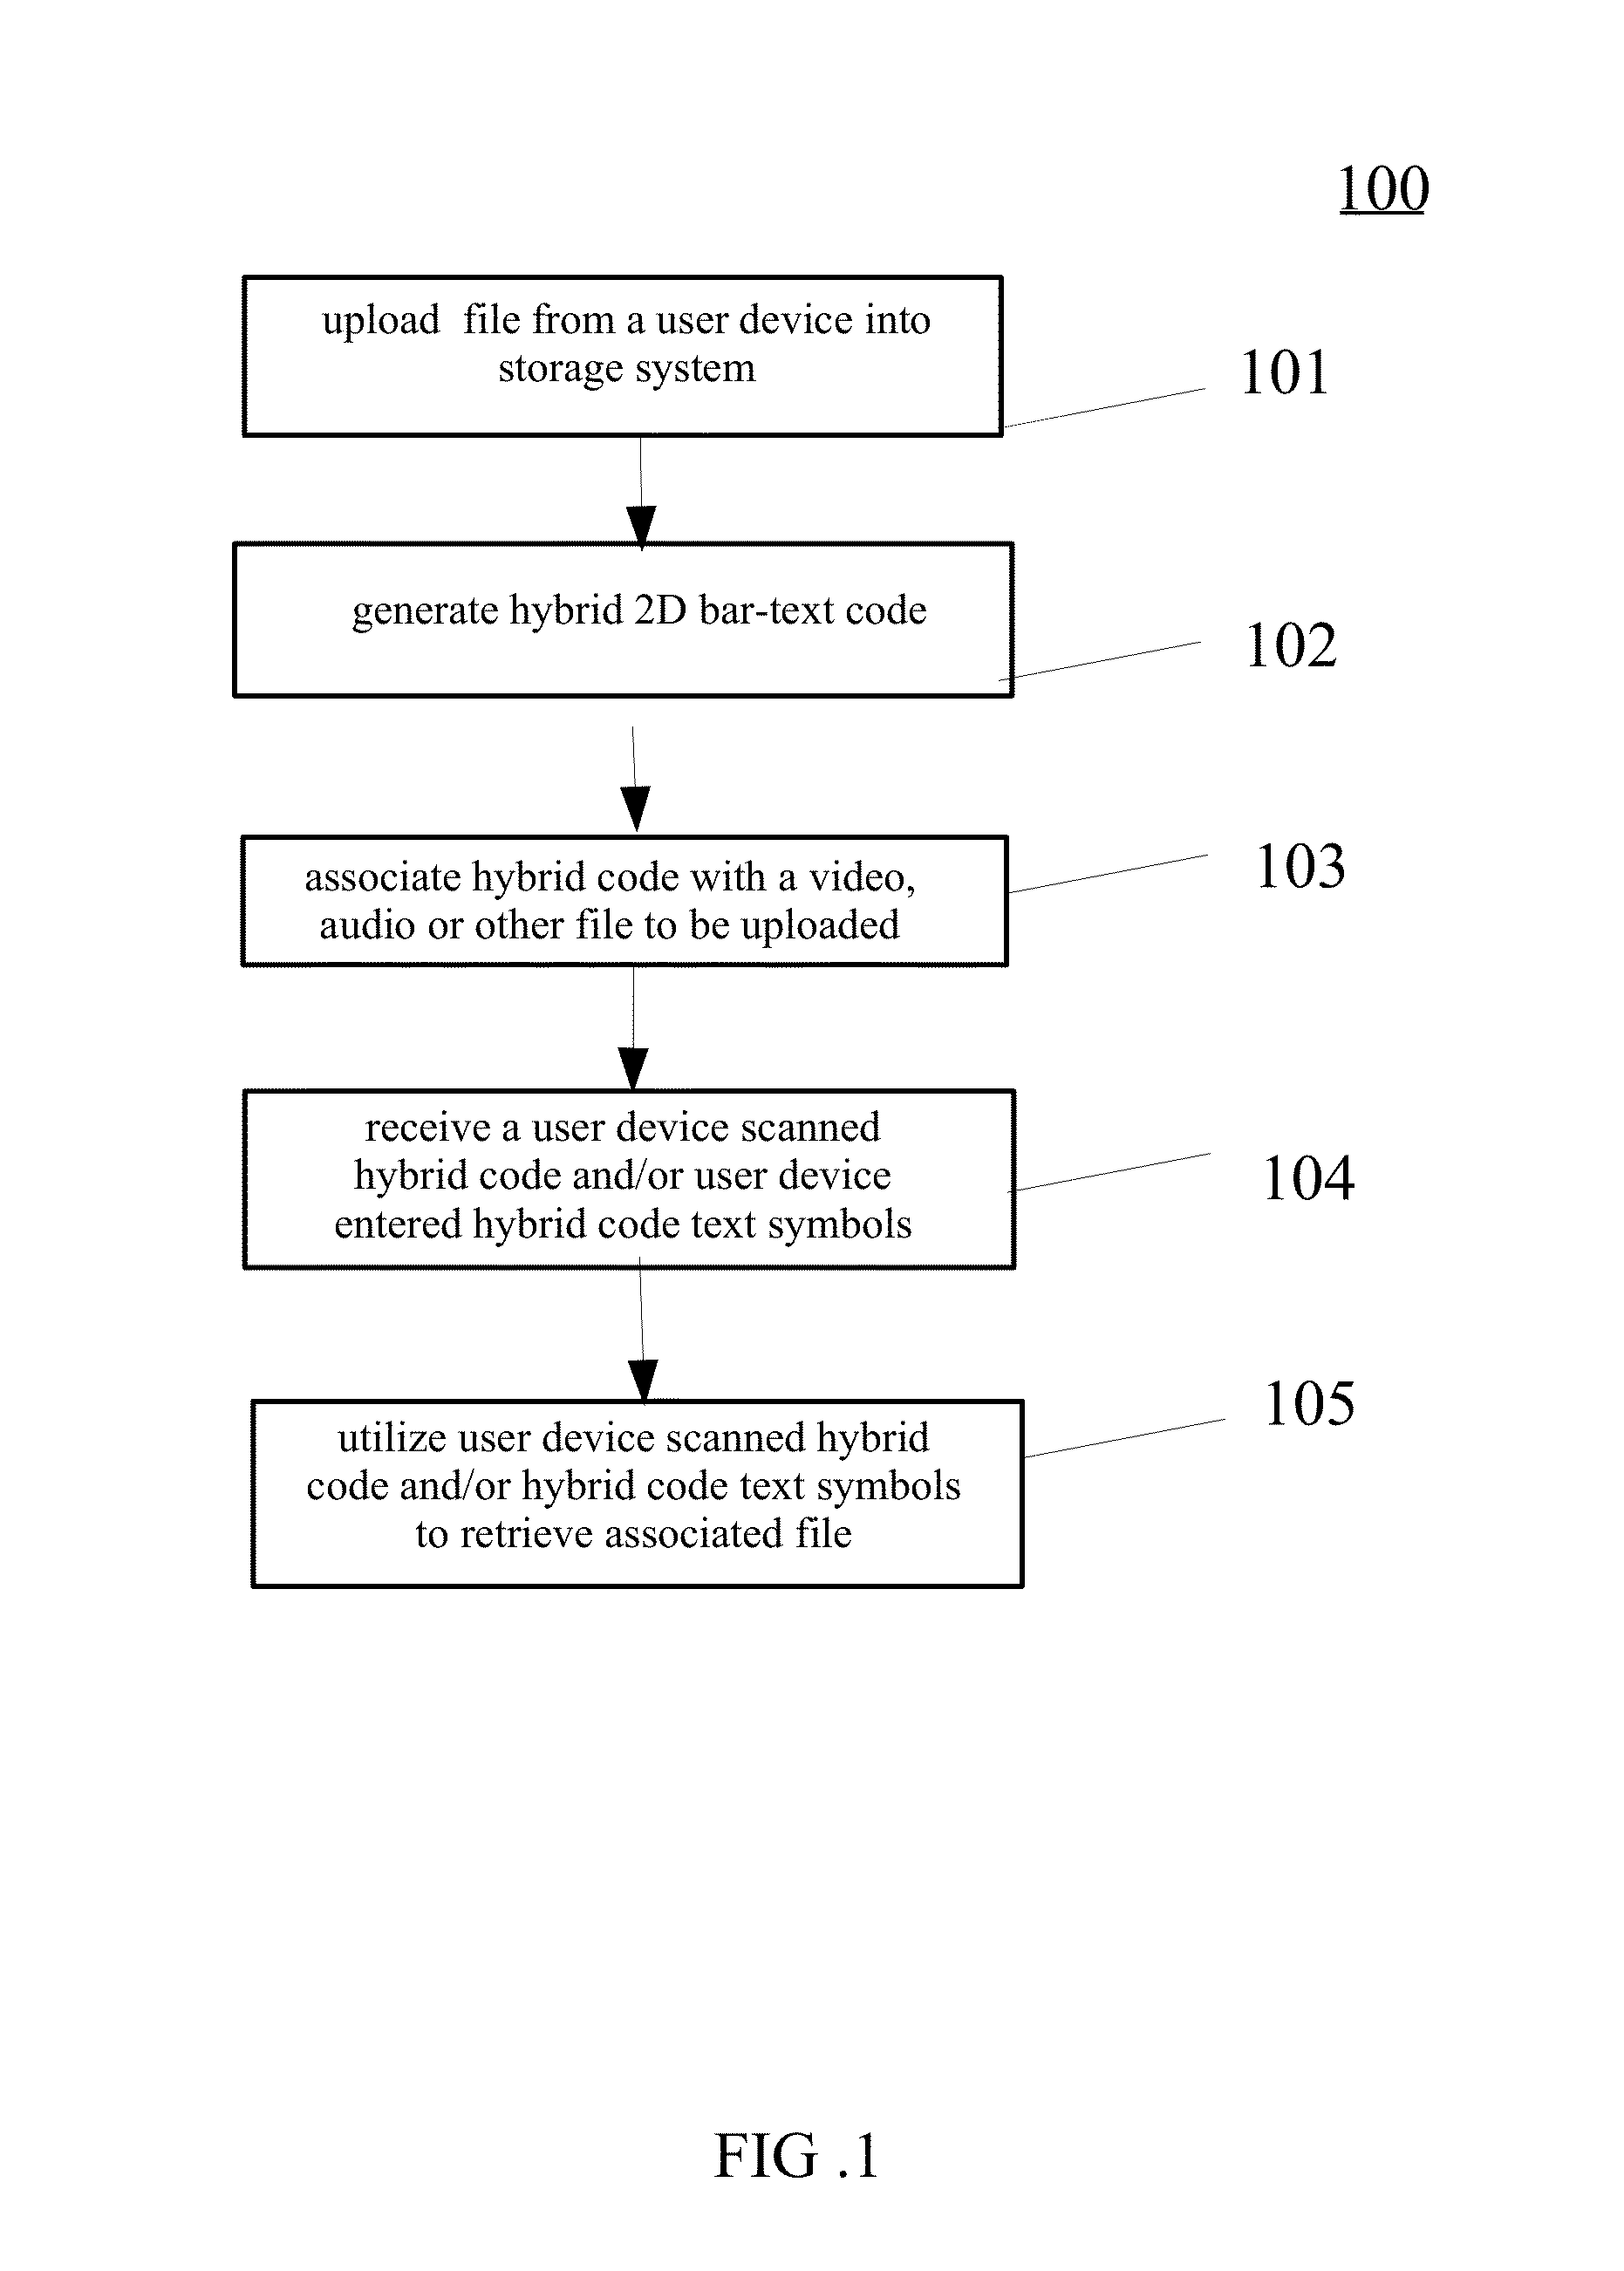 Display card with memory tag- hybrid multidimensional bar text code